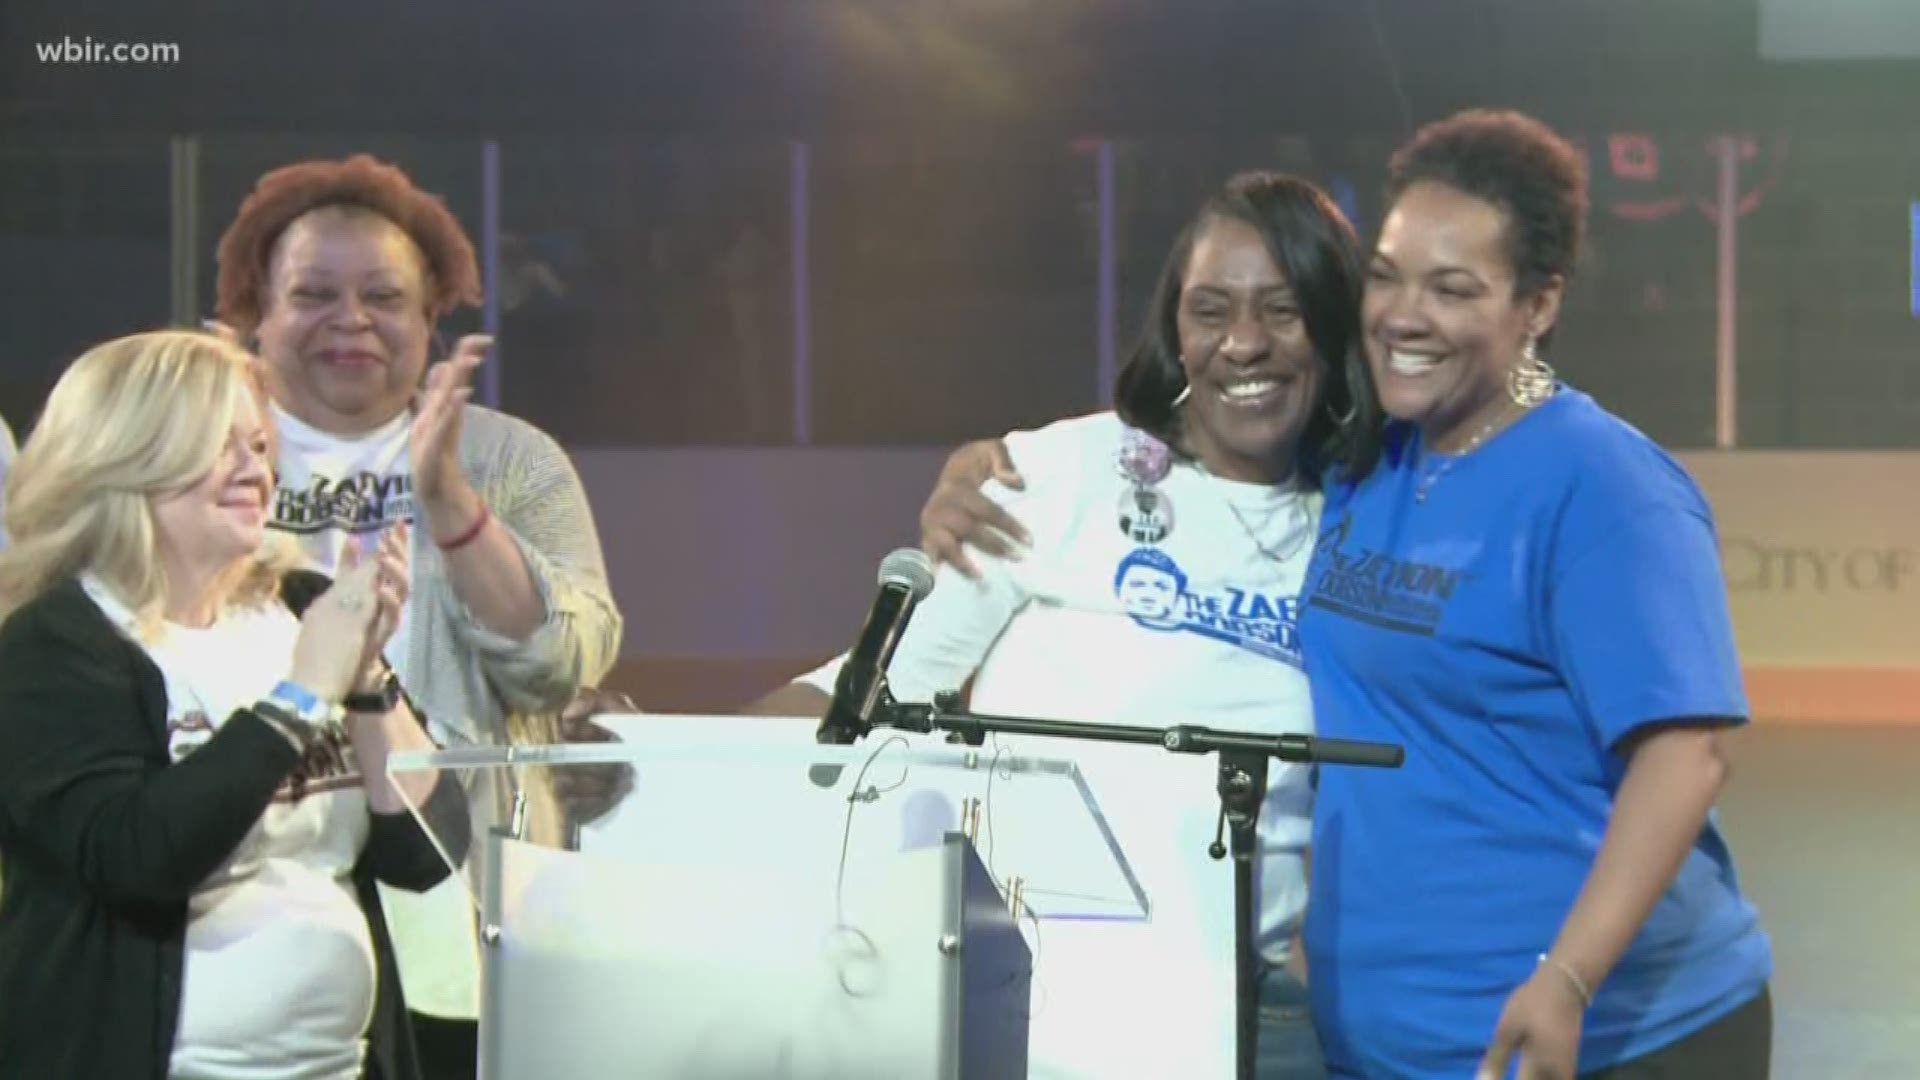 The Change Center got a $10,000 check Sunday from the Zaevion Dobson Memorial Foundation. Zaevion's mother, Zenobia Dobson, presented it at the fourth annual "Skate for Zae" event.